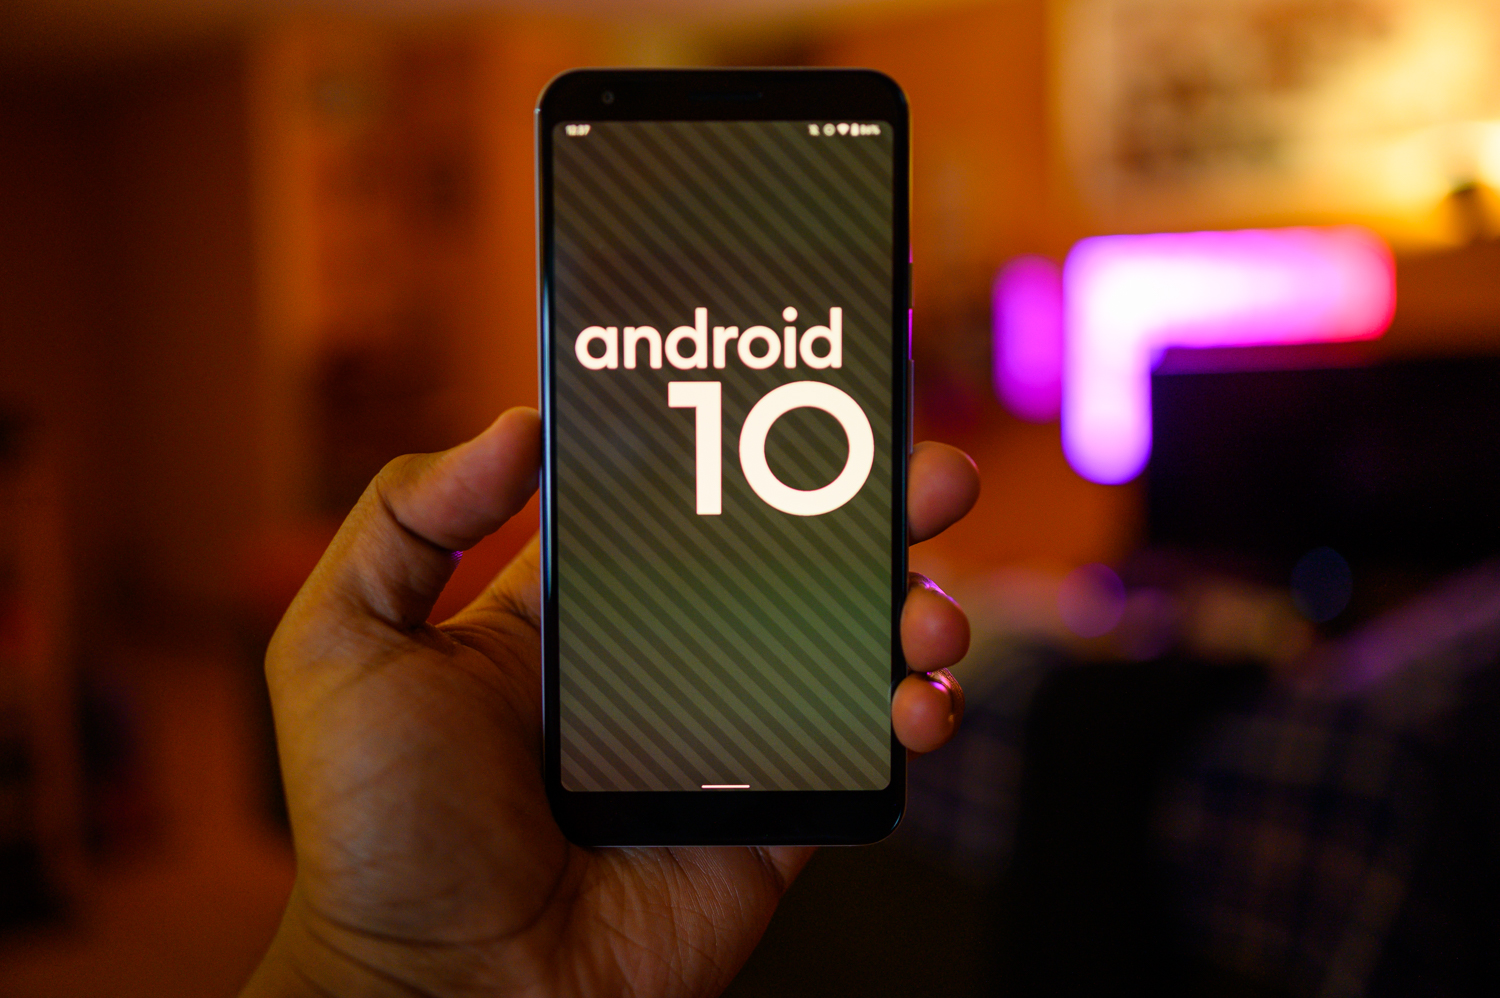 Android 10 Review: A Small But Helpful Update